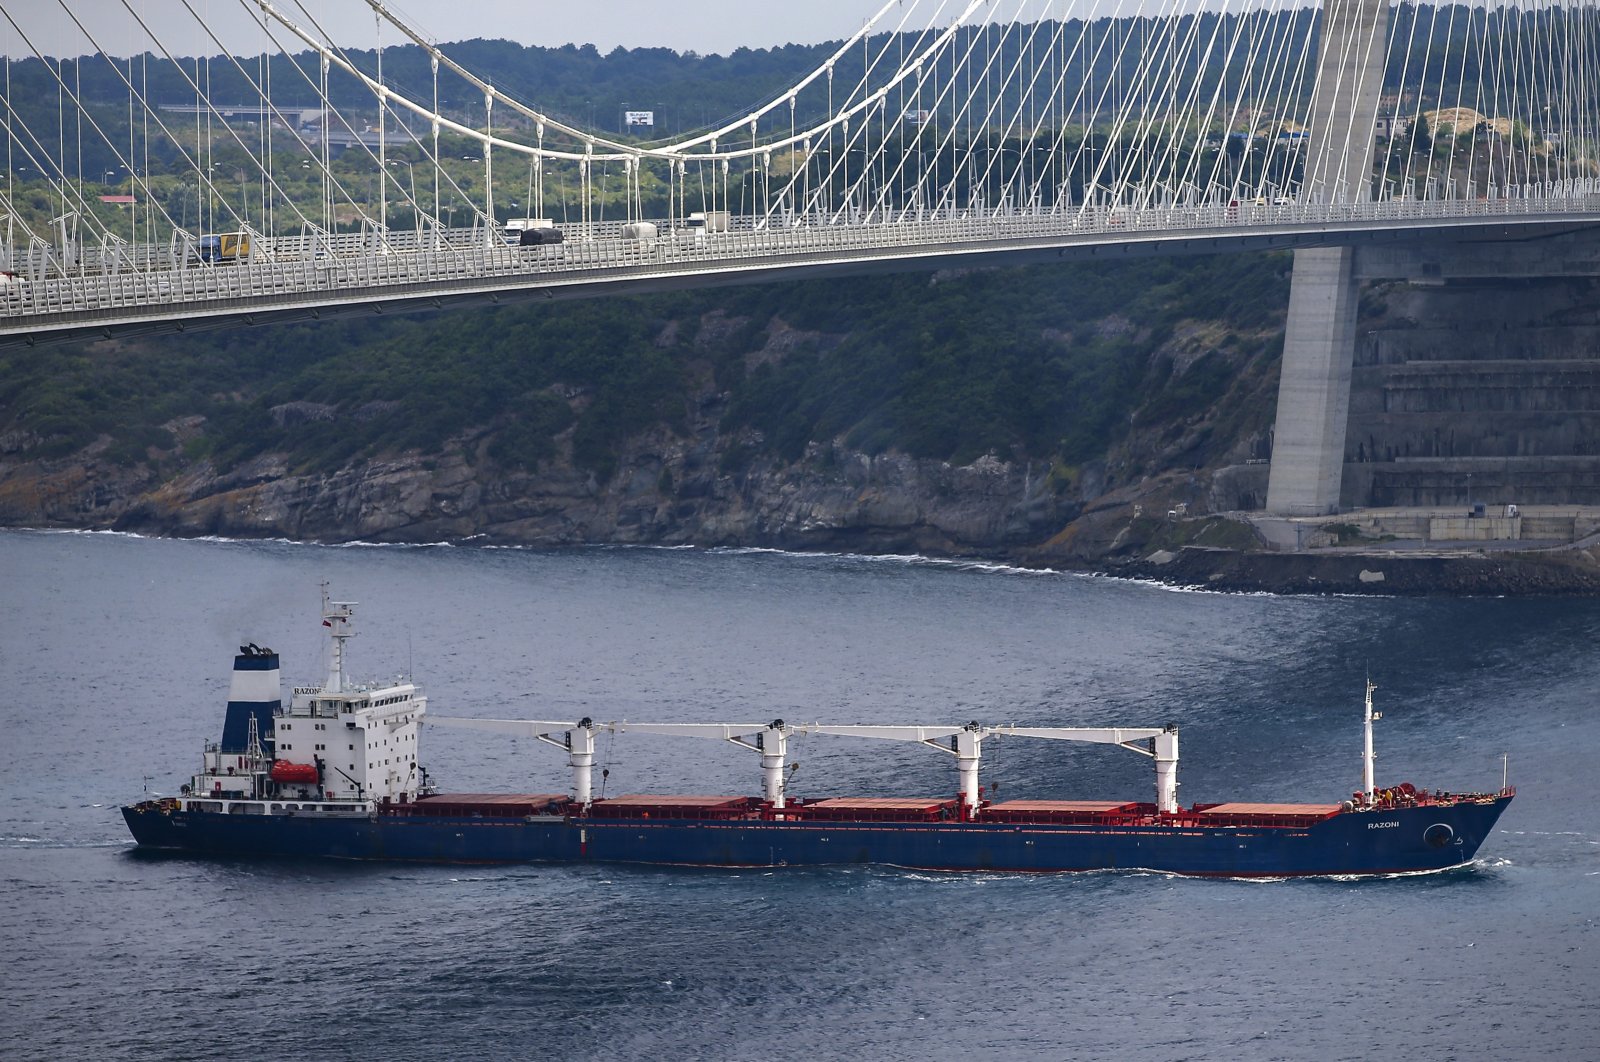 The Sierra Leone-flagged cargo ship Razoni sails under the Yavuz Sultan Selim Bridge after being inspected by Russian, Ukrainian, Turkish and U.N. officials at the entrance of the Bosporus in Istanbul, Turkey, Aug. 3, 2022. (AP Photo)